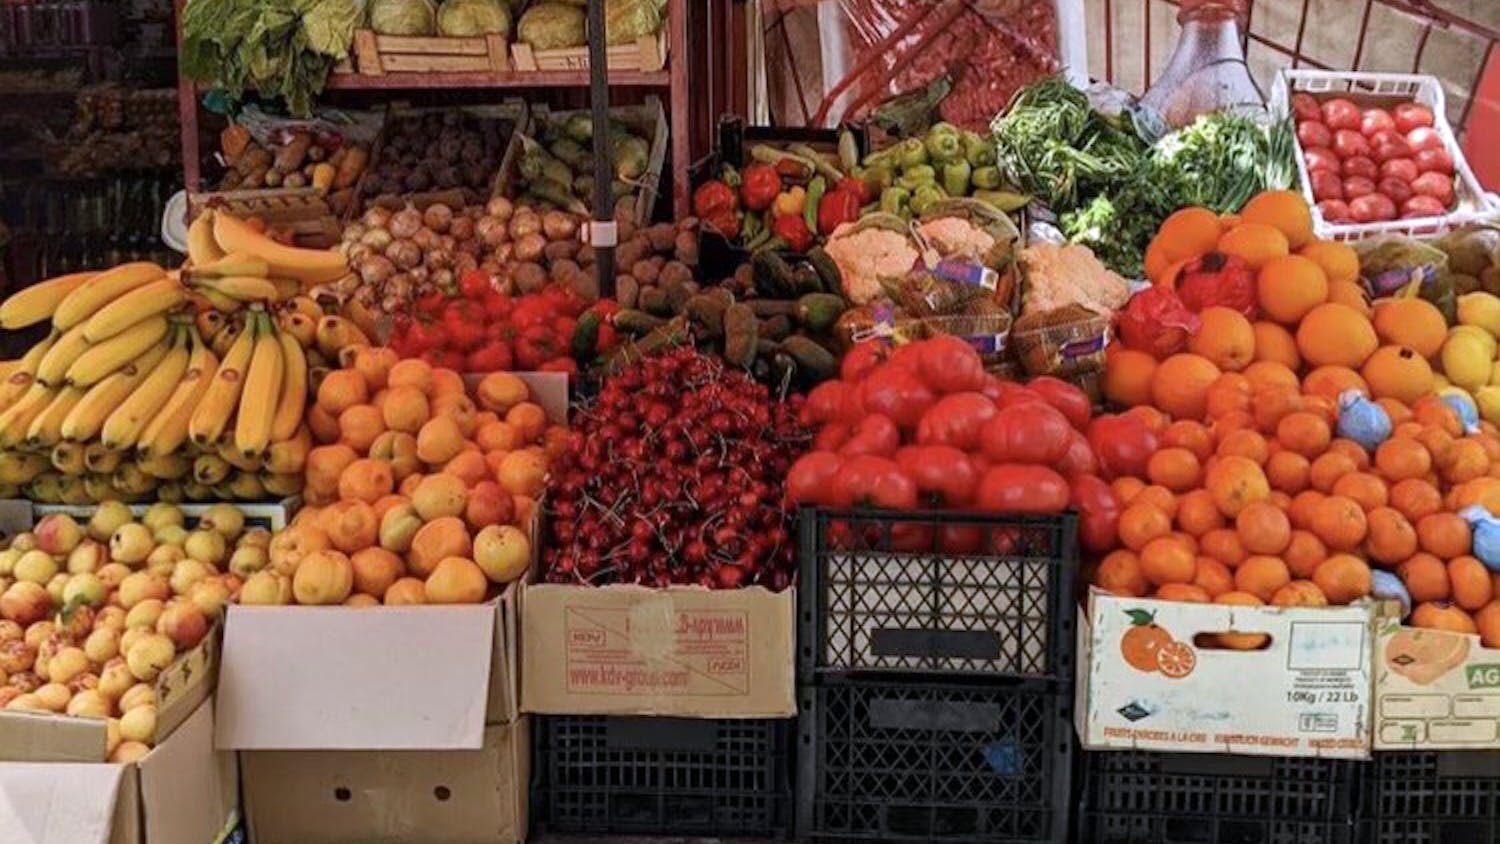 Fruit on sale at the Dordoi Bazaar in Bishkek, Kyrgyzstan. Many countries prioritize healthy and fresh food, especially fruit.